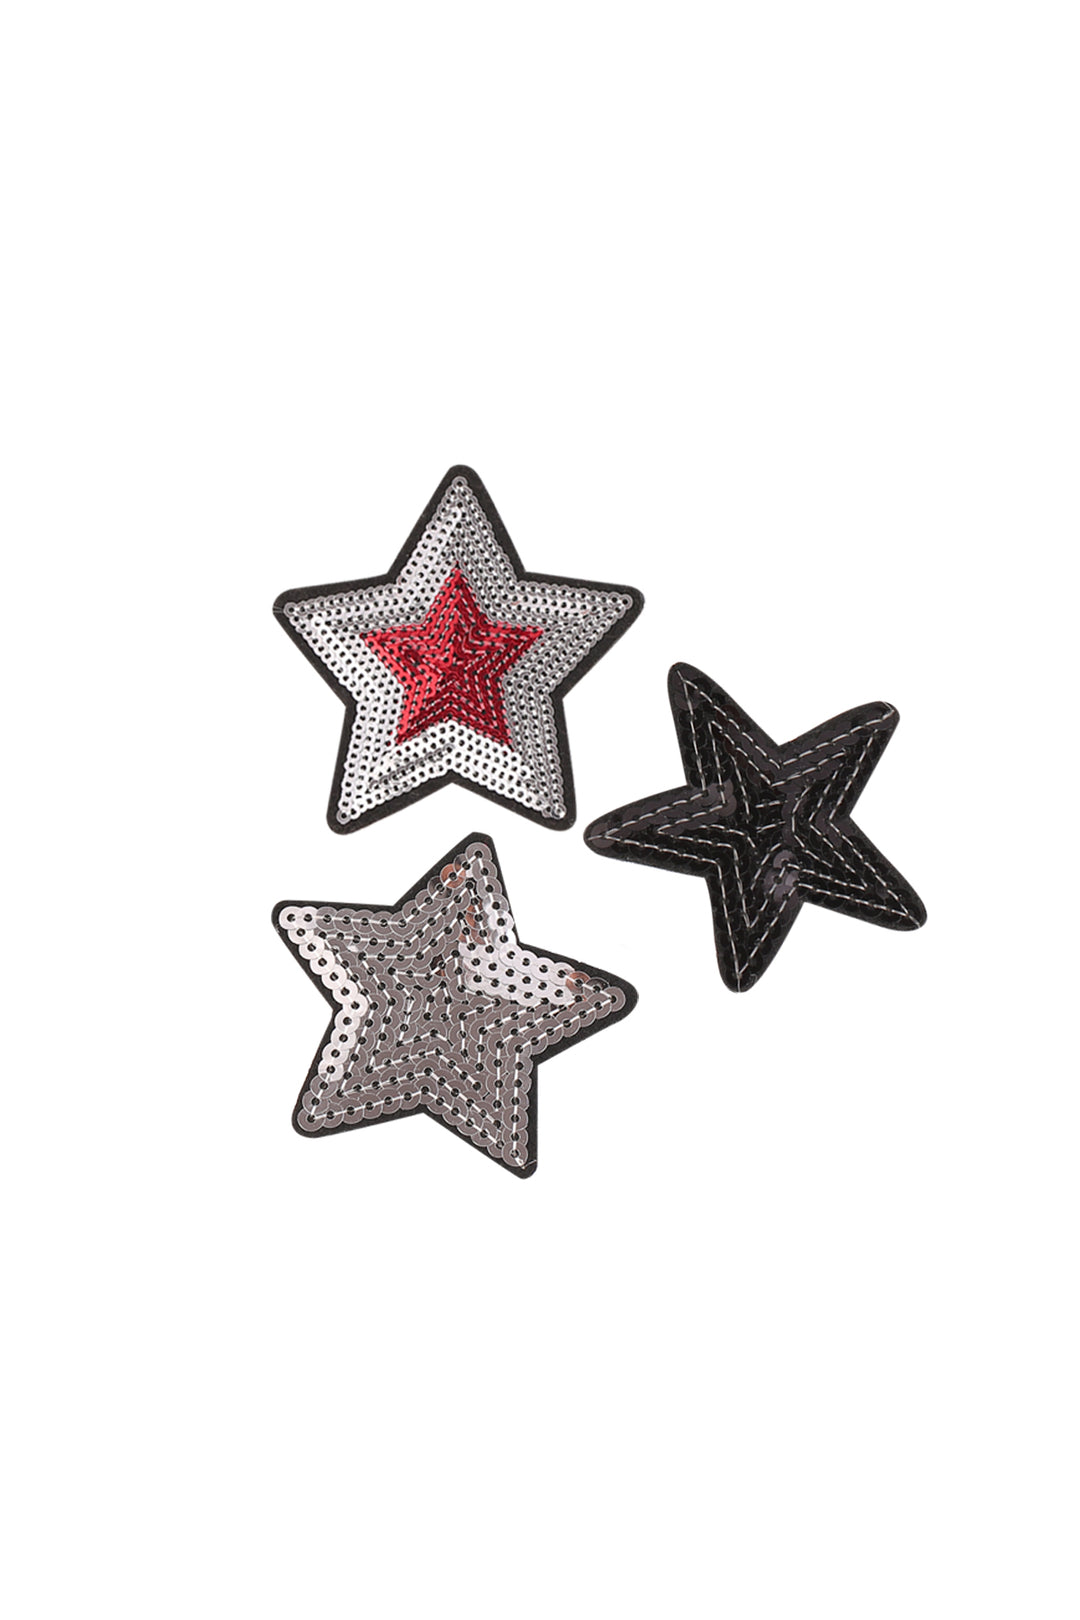 Set of Designer Cute Shining Star Glittery Sequins Patch